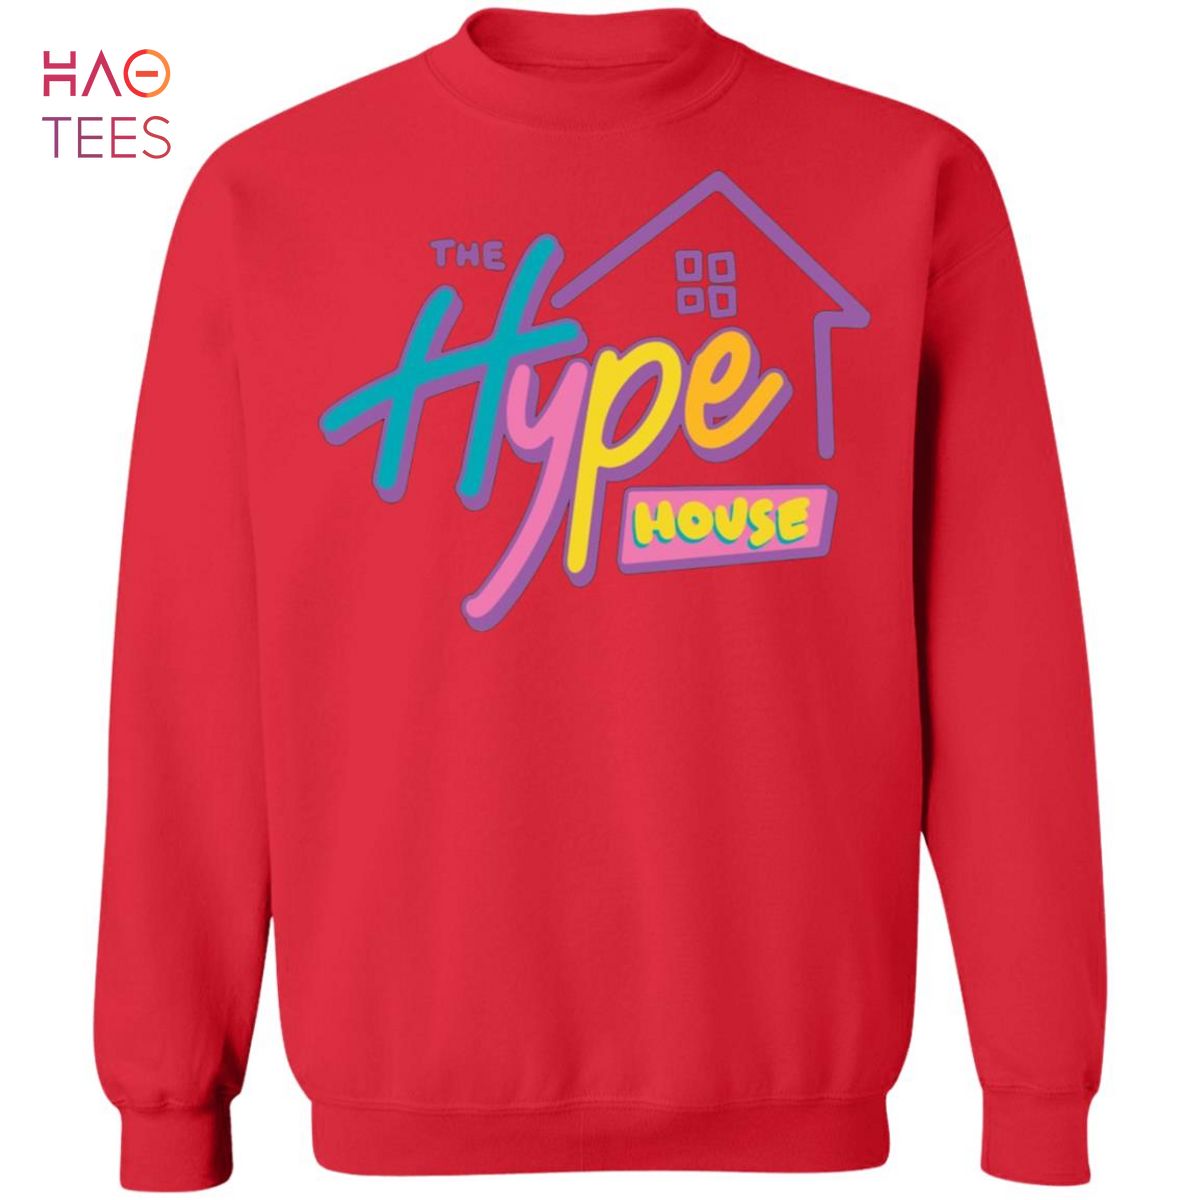 [NEW] Hype House Sweater